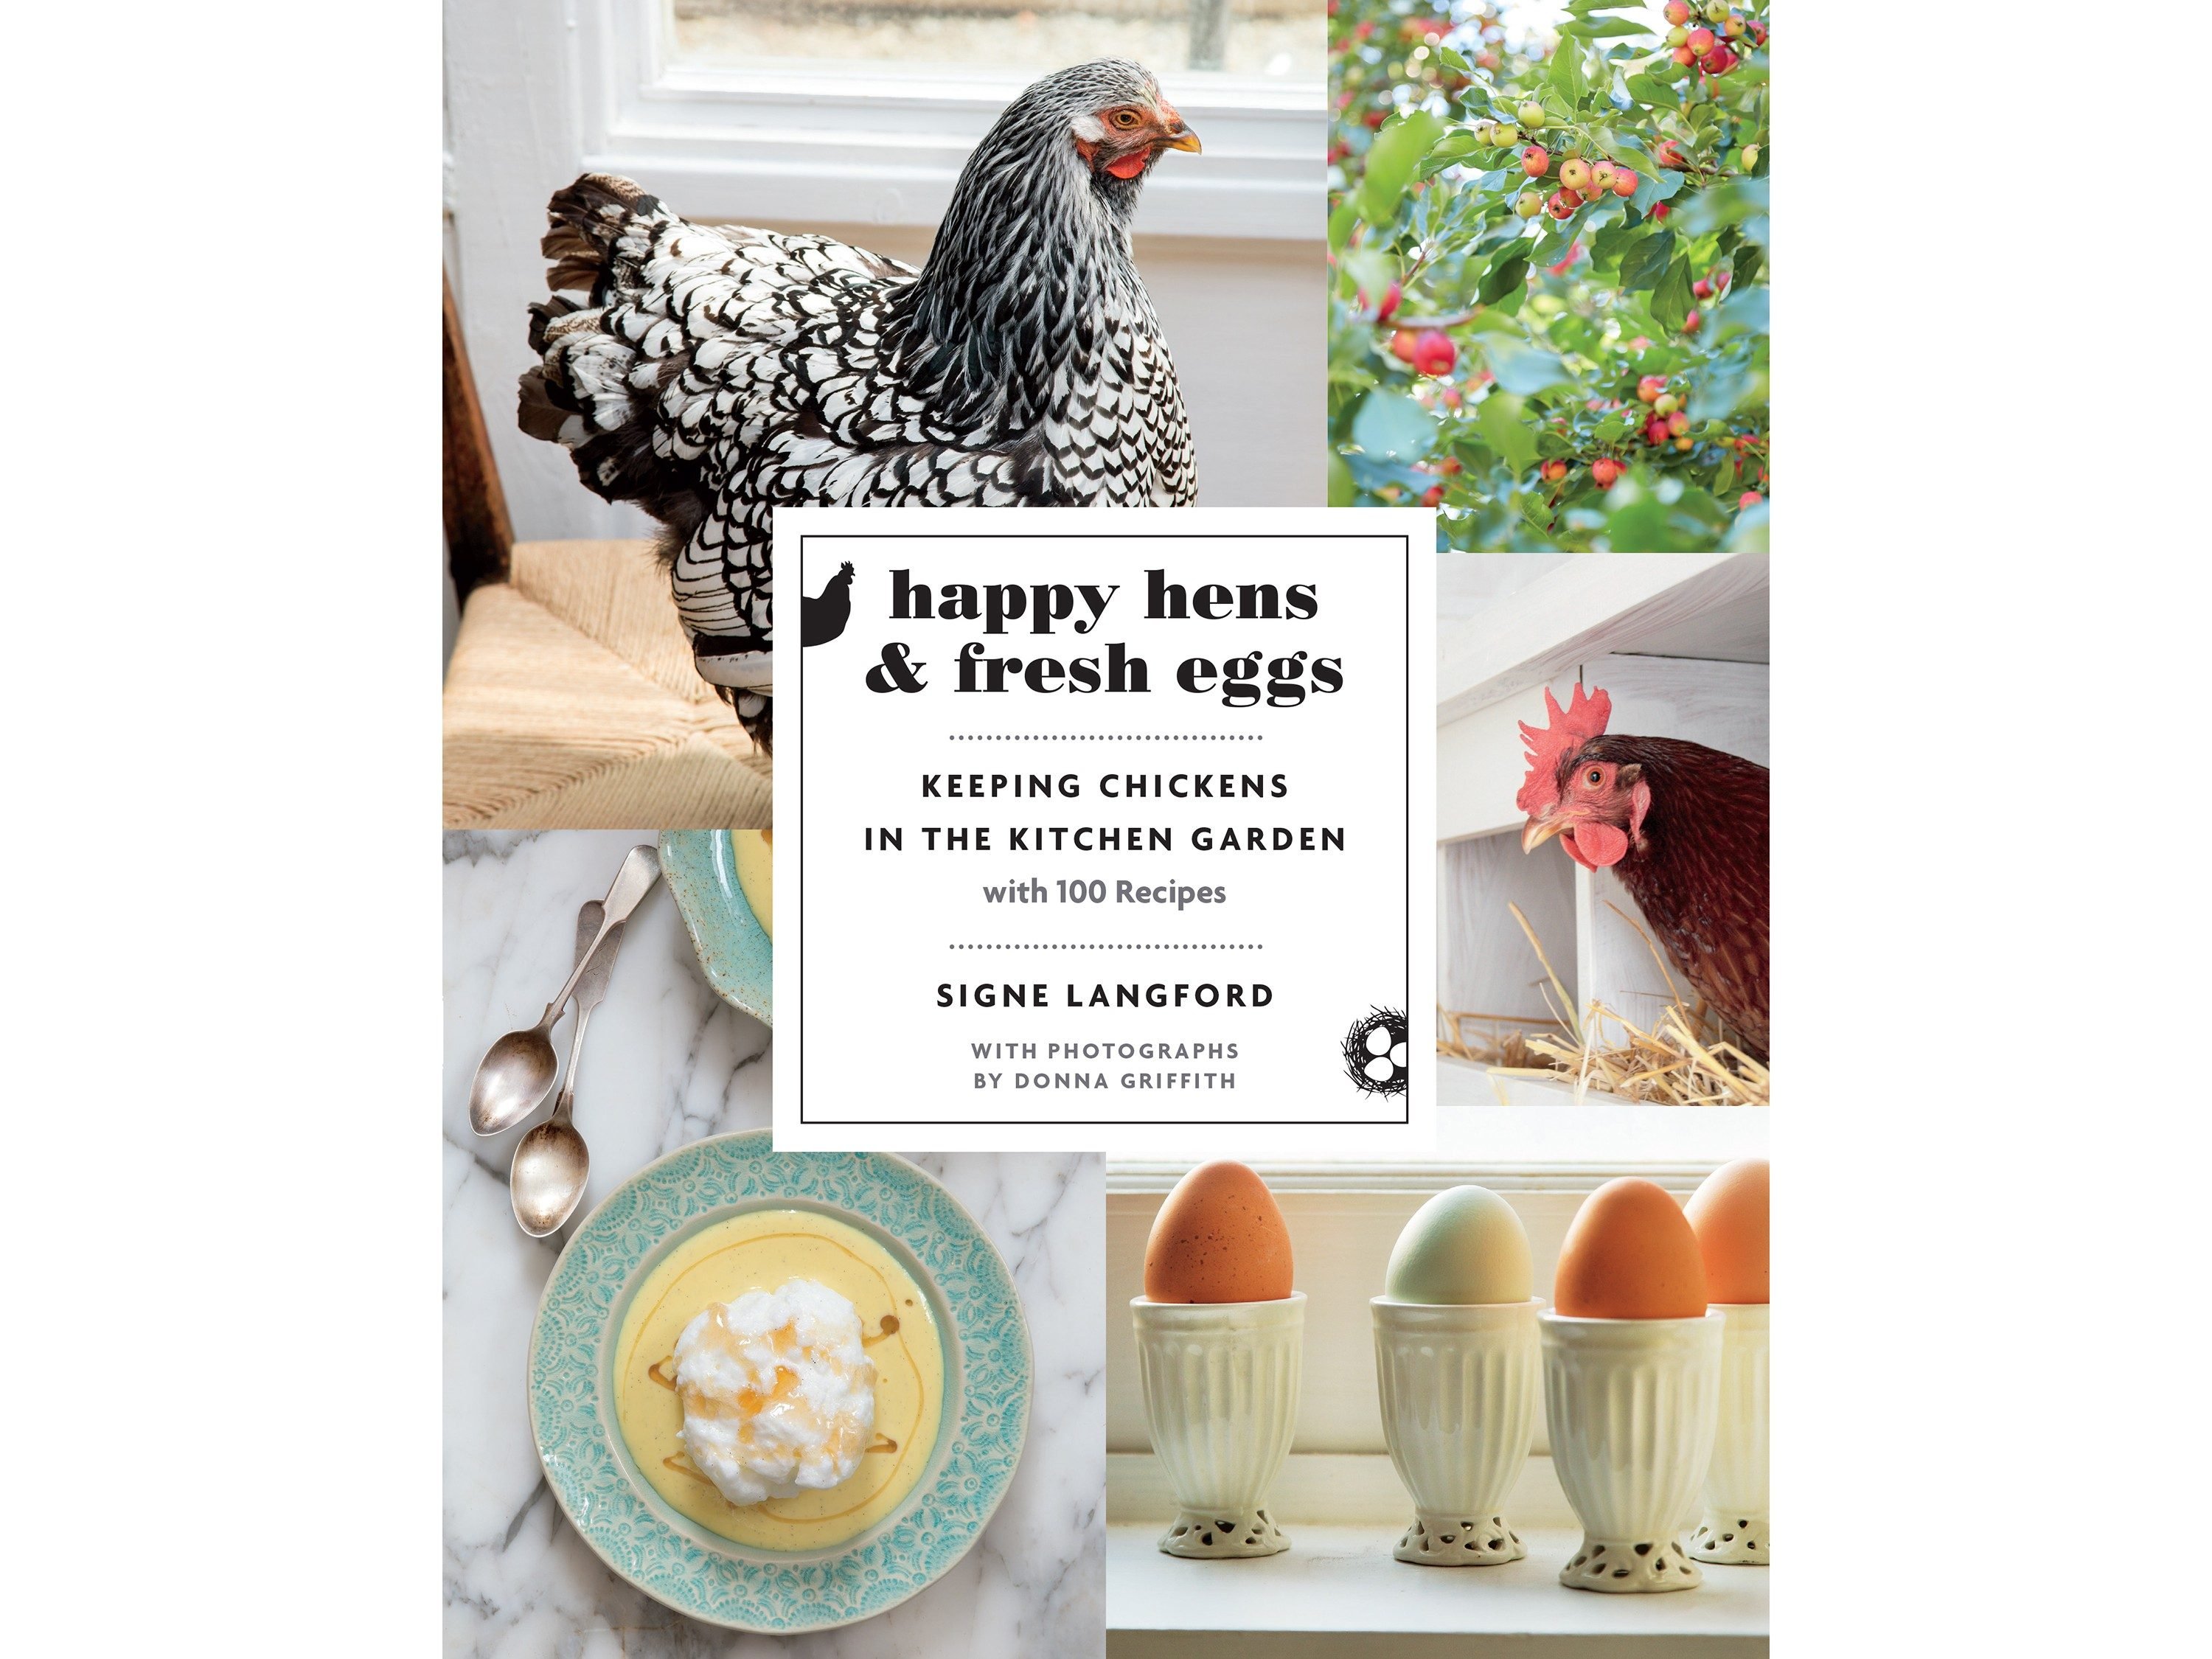 FURTHER READING: Happy Hens & Fresh Eggs